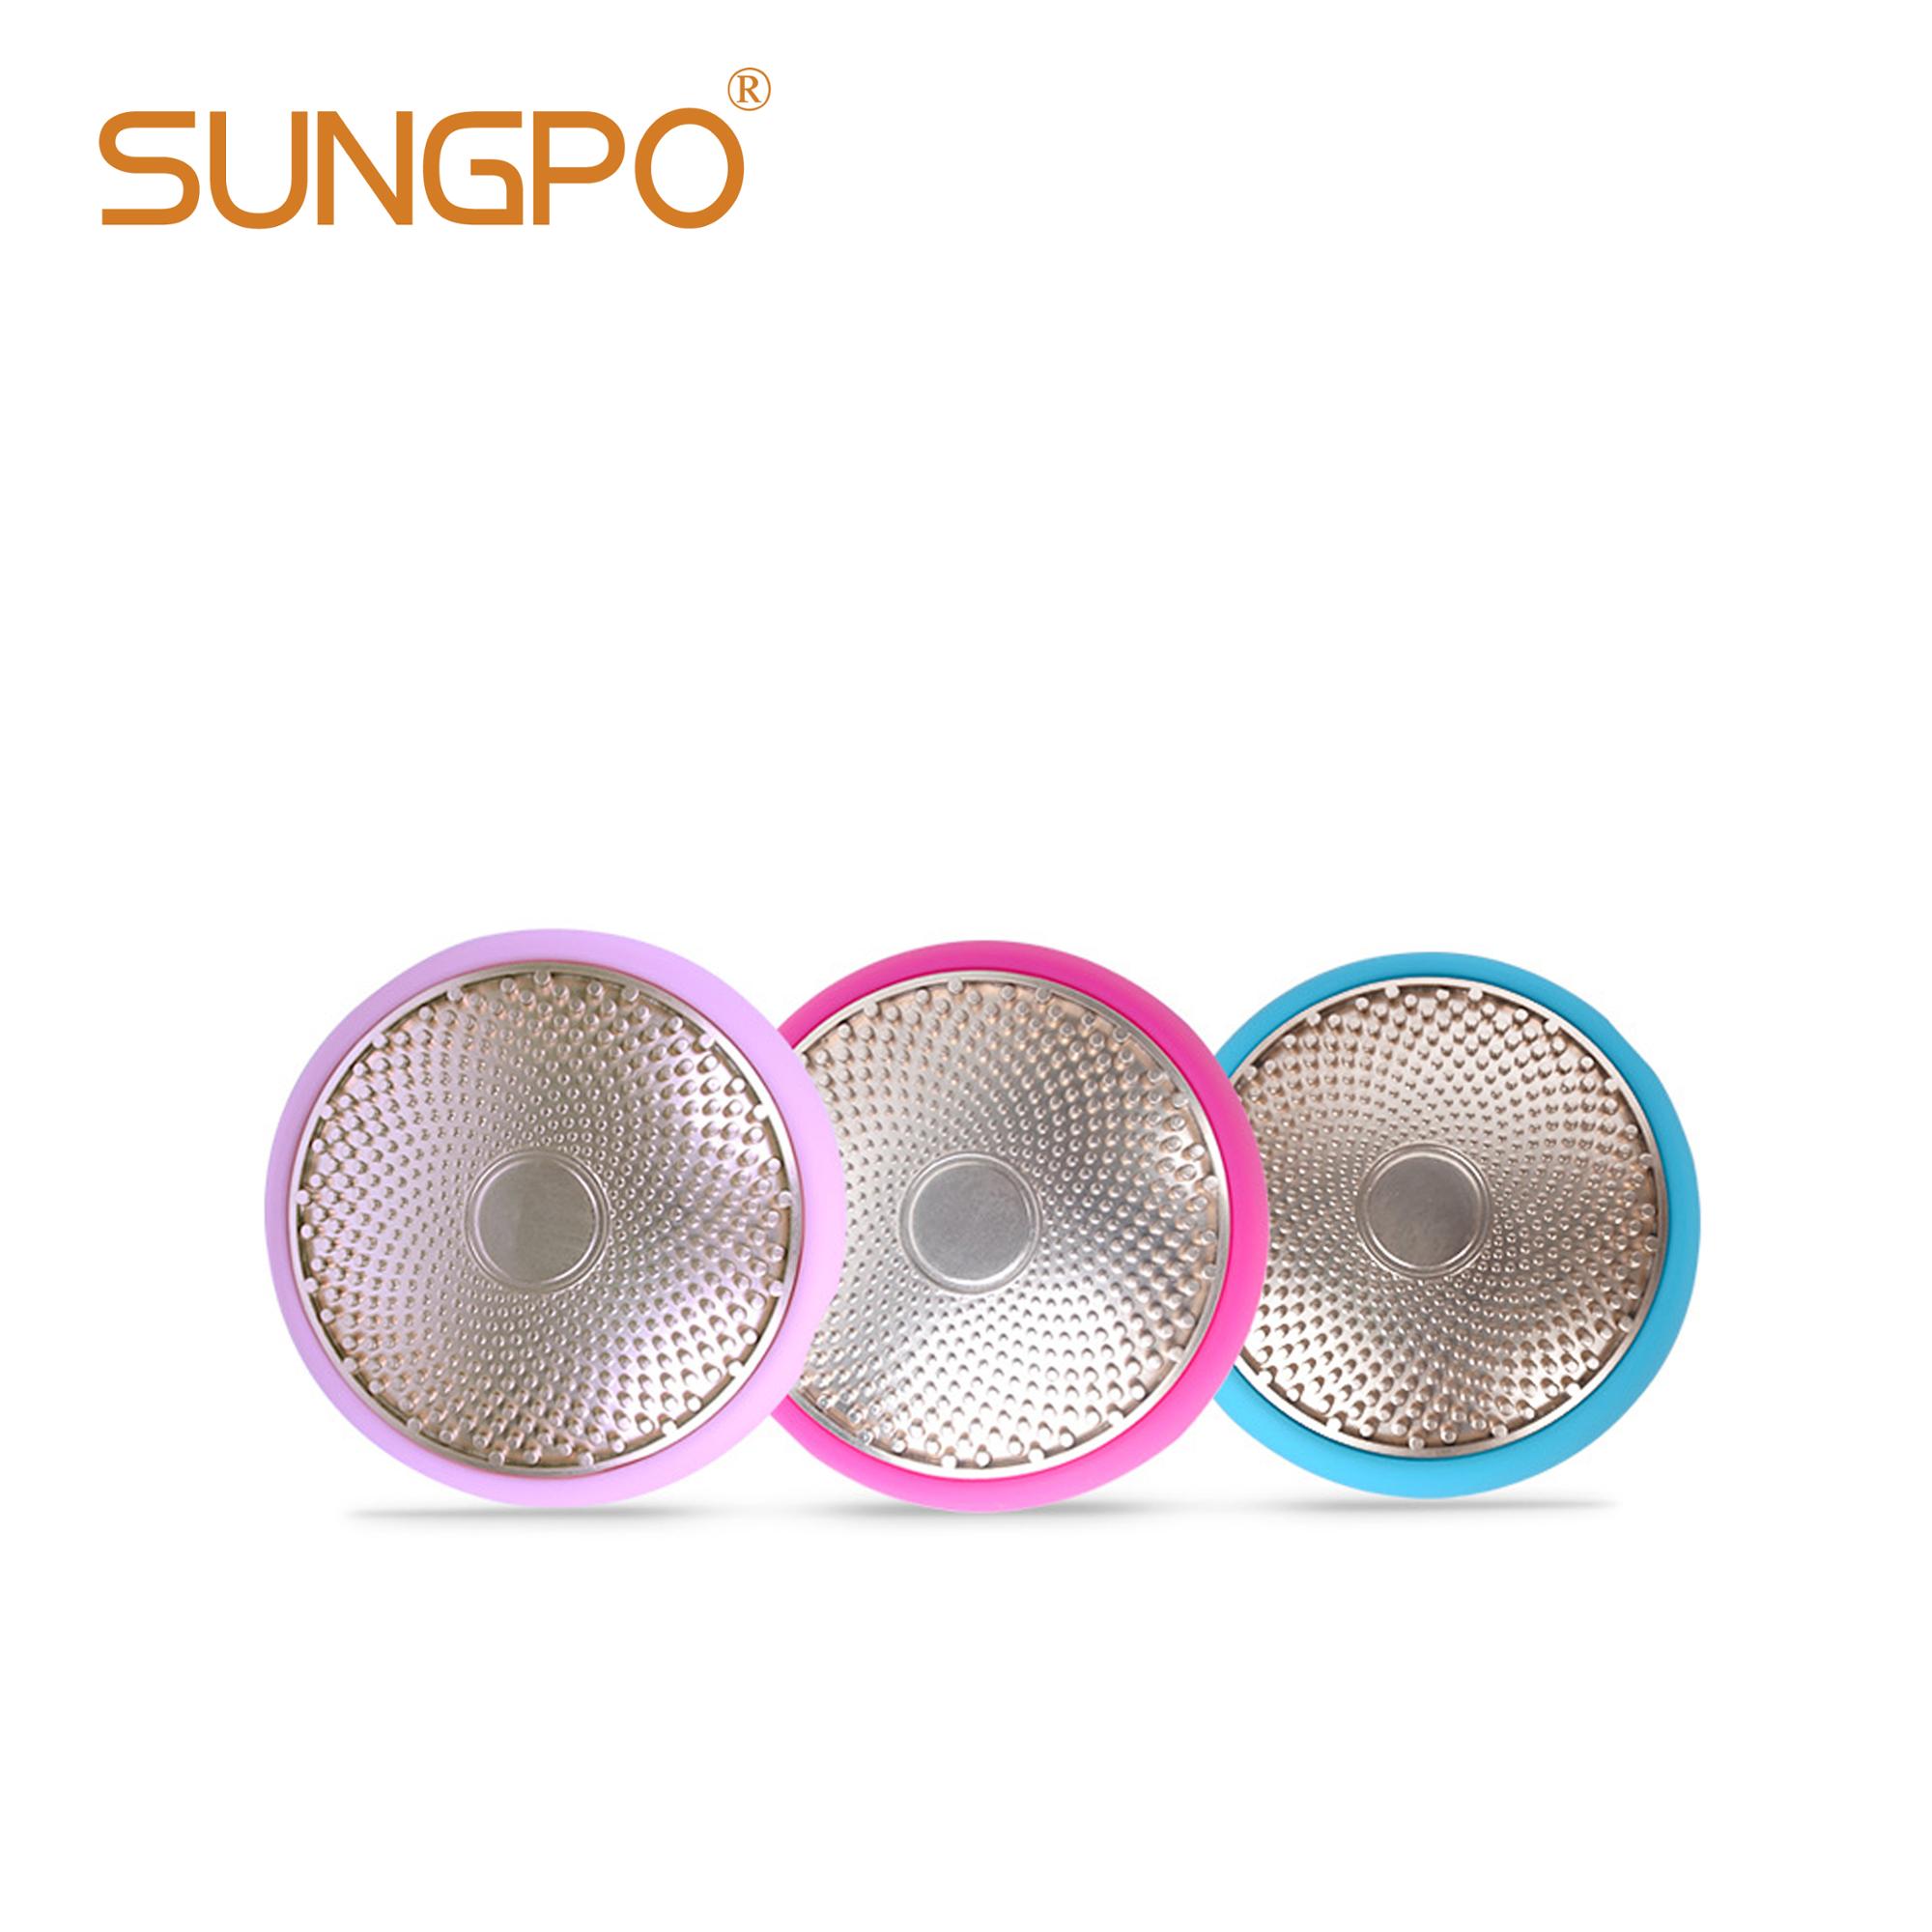 2018 Trending Skin Care Homemade Beauty Products Face Mask Making Machine to 90 Seconds Mask Treatment SUNGPO Providing